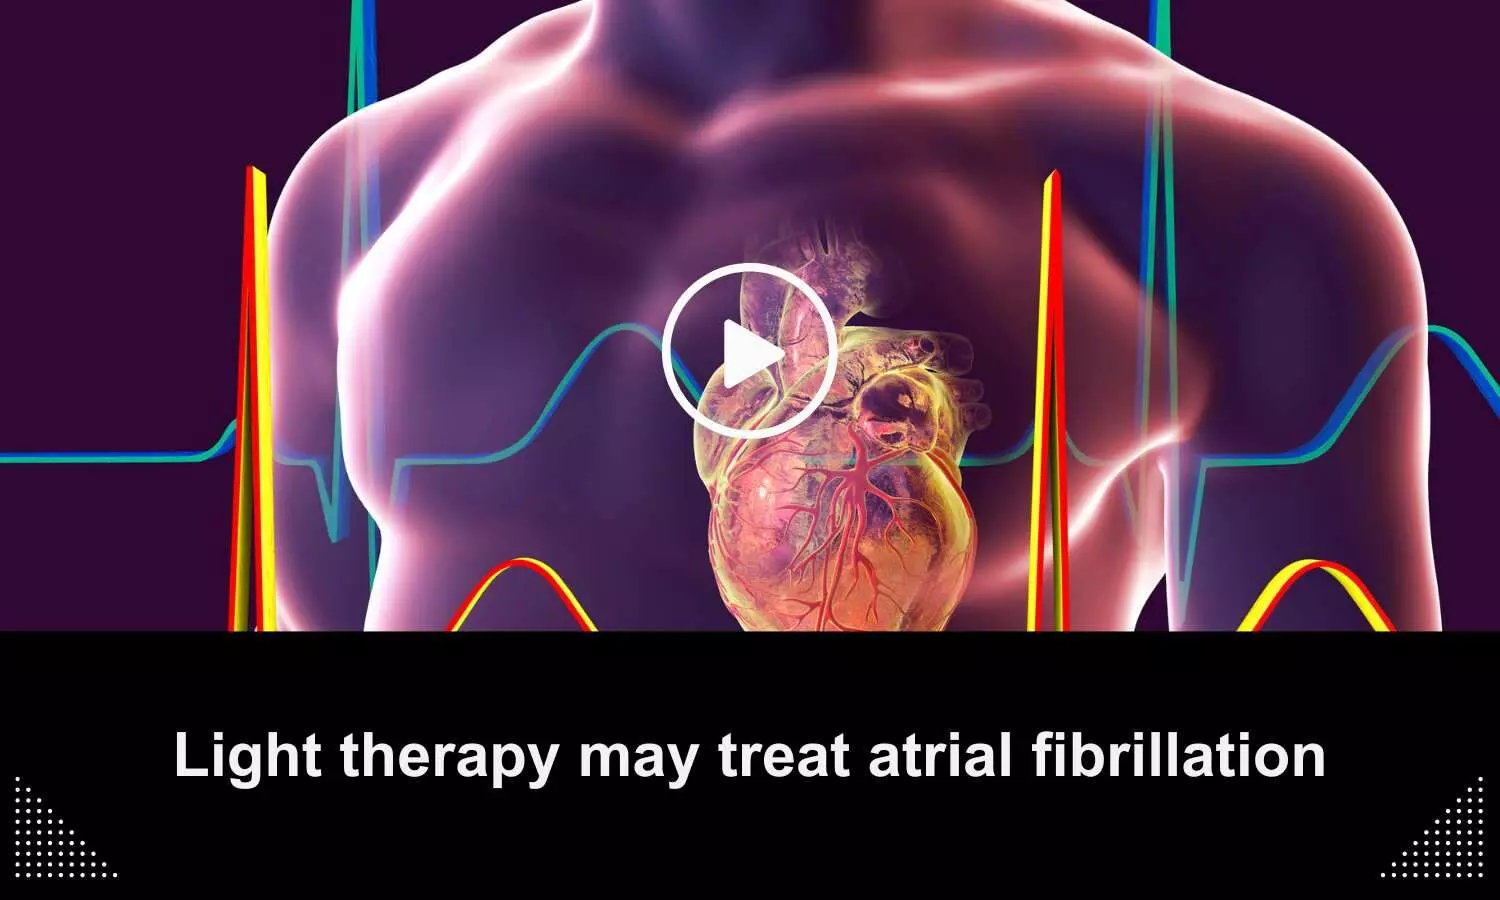 Light therapy may treat atrial fibrillation